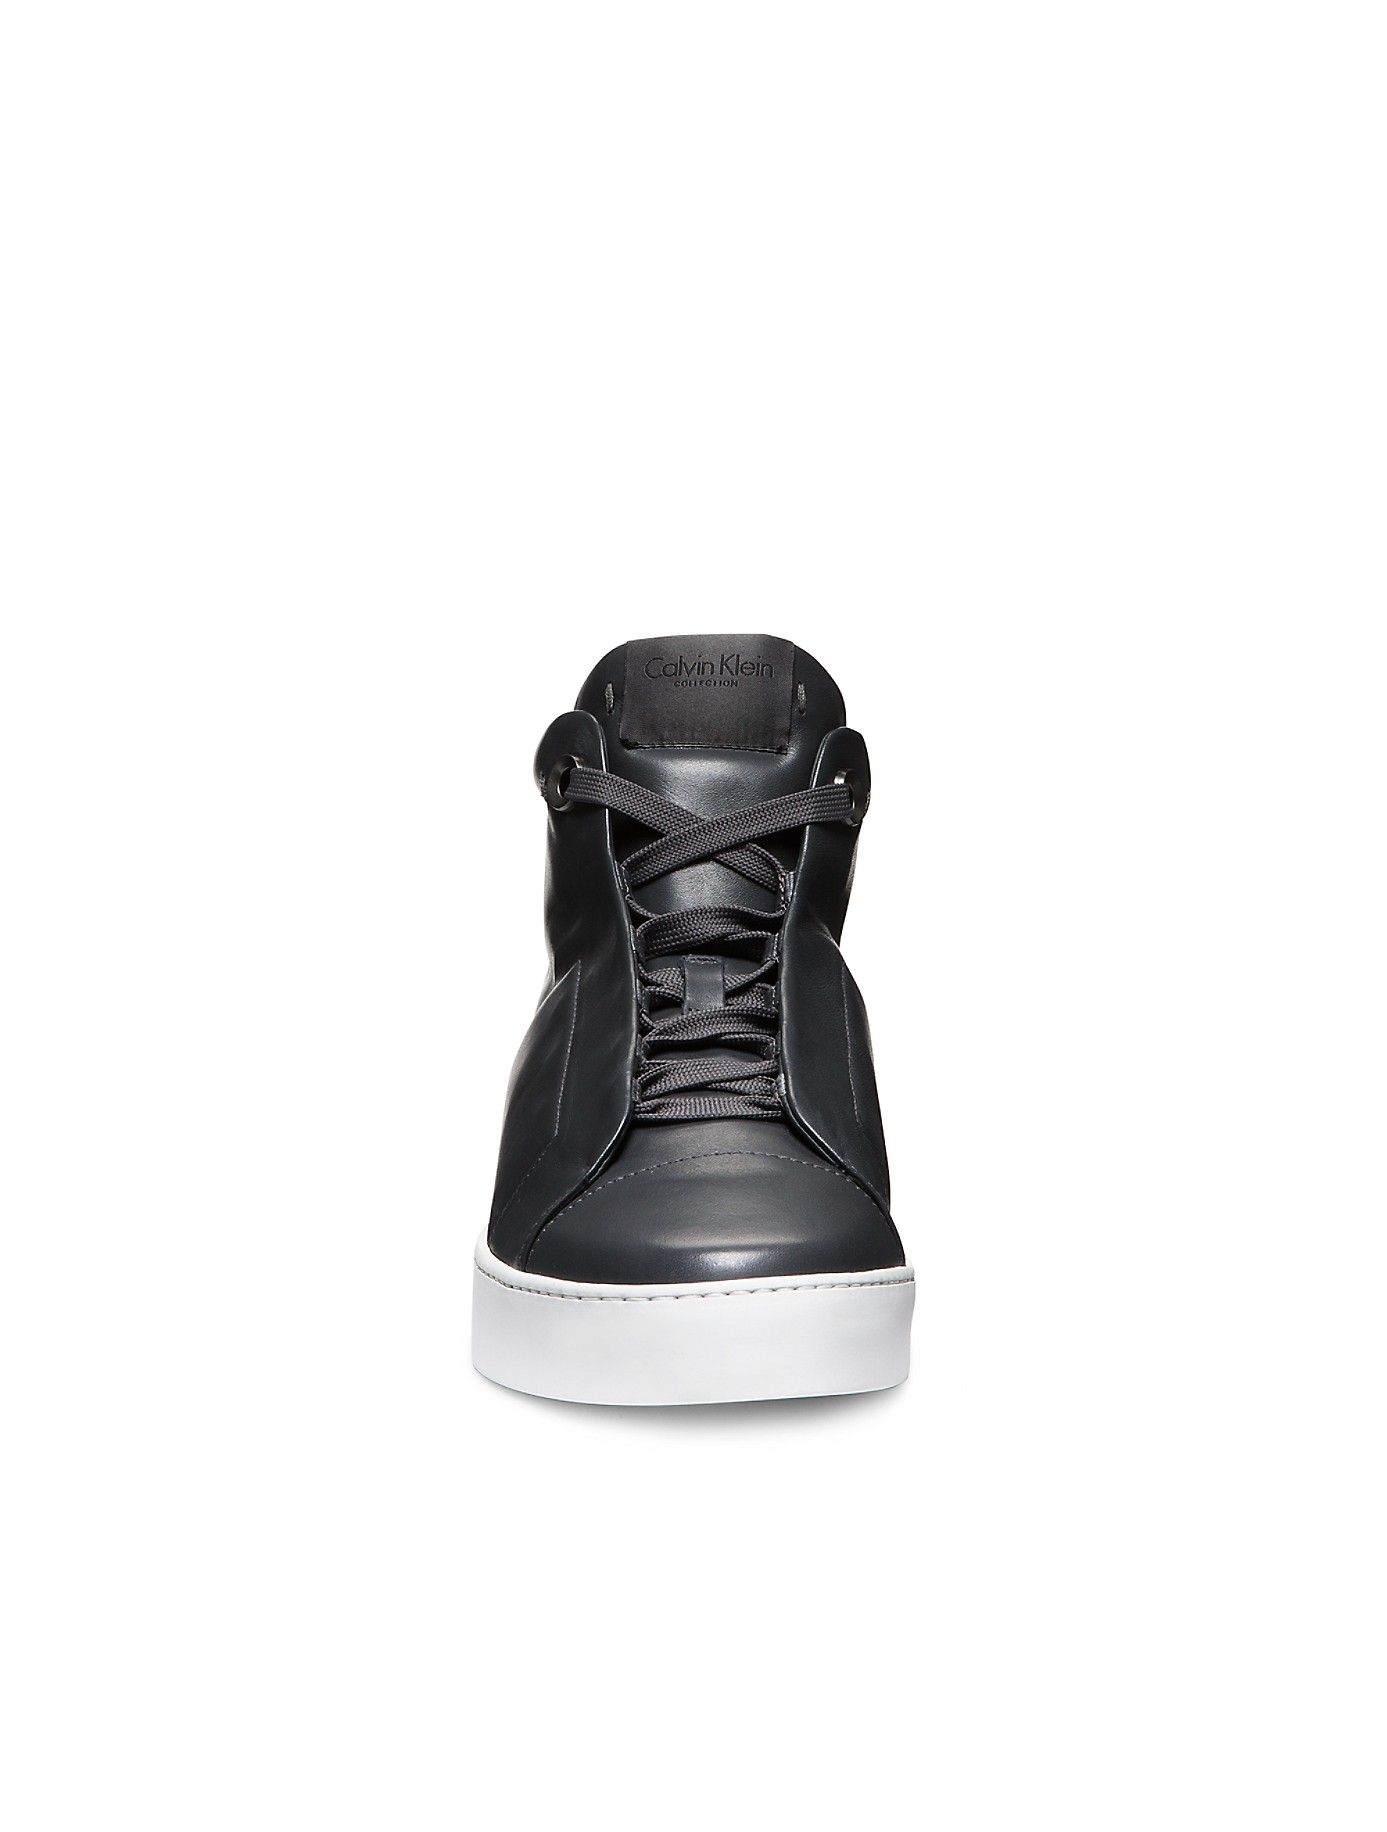 Calvin klein Tumbled Leather High Top Sneakers in Black for Men | Lyst